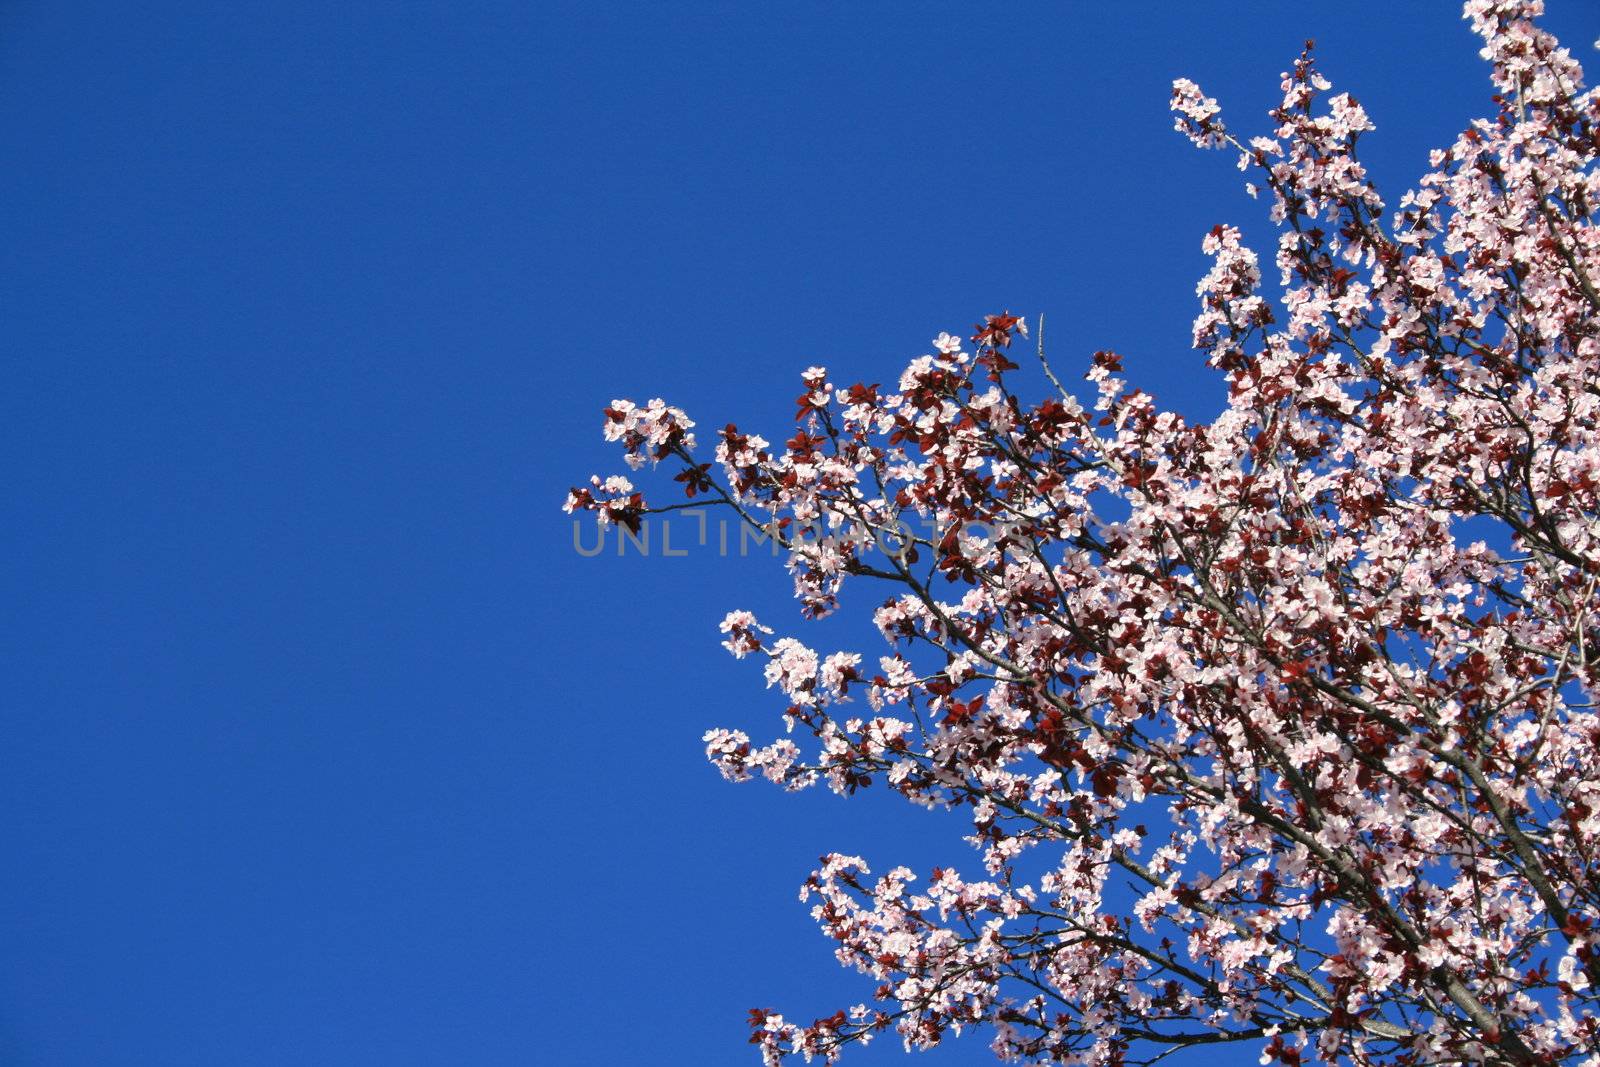 Cherry blossoms close up over clear blue sky.
